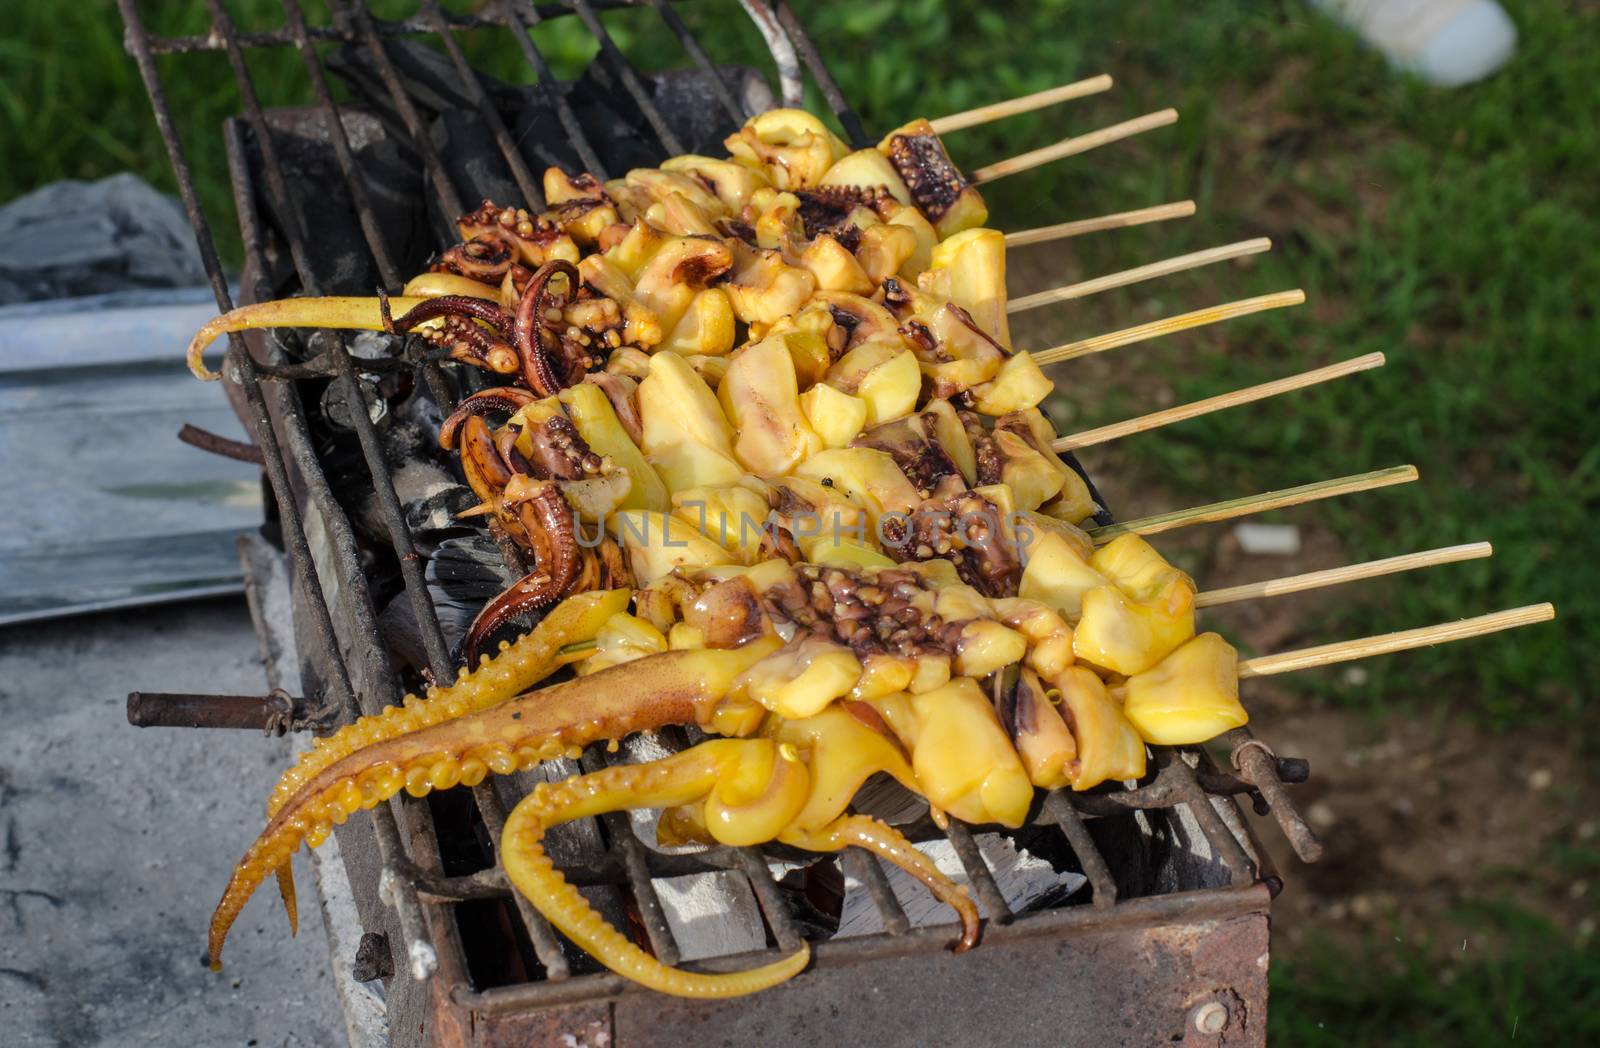 The squid grilled over charcoal fire by photobyphotoboy